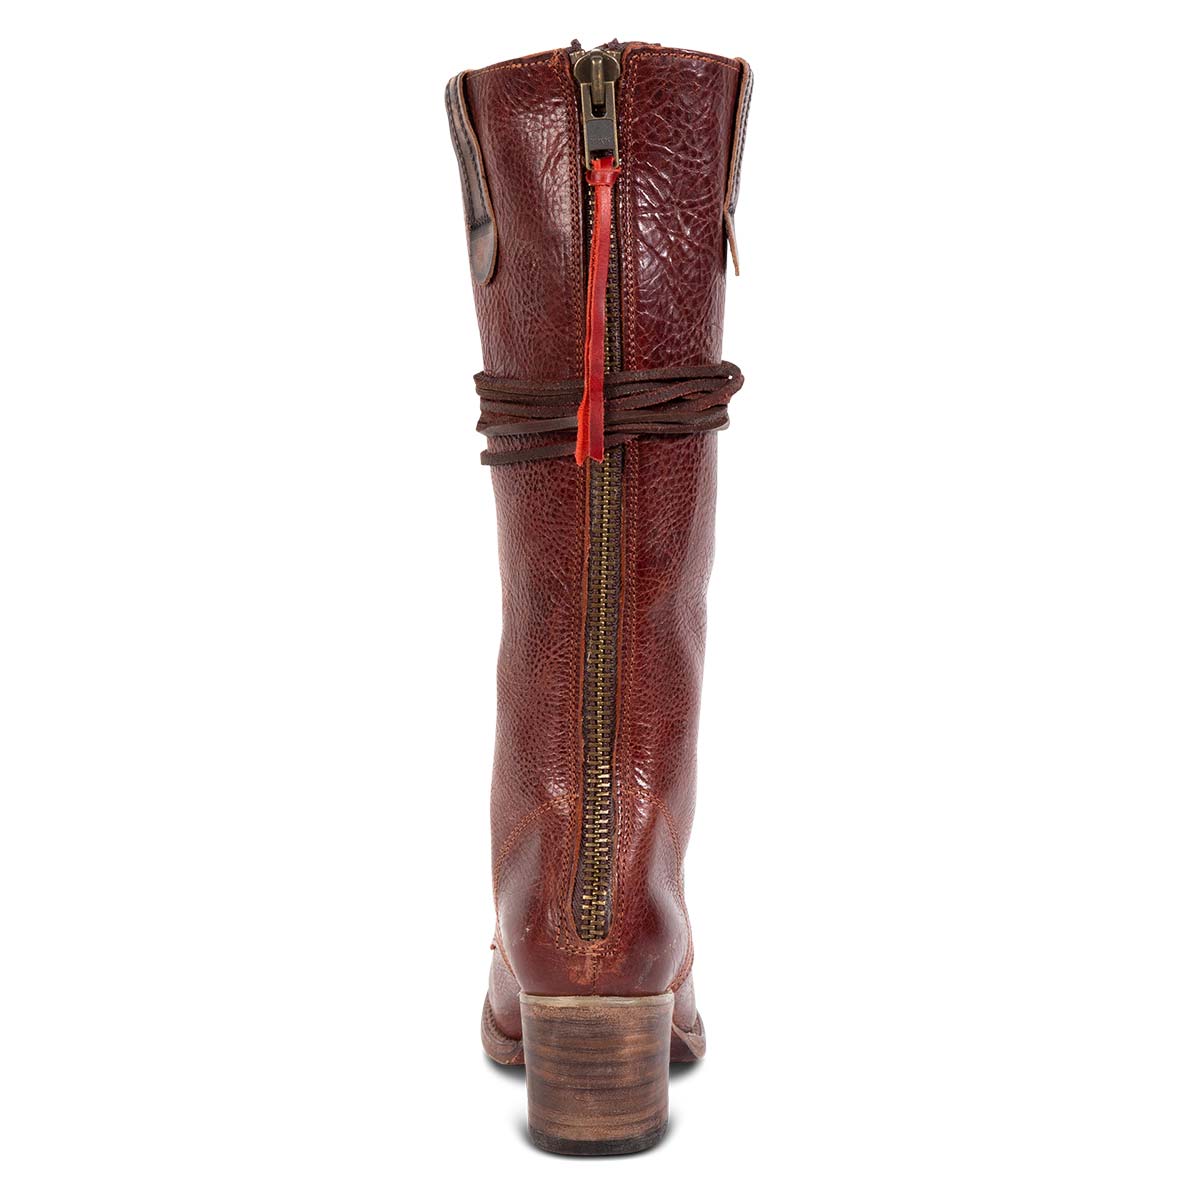 Back view showing brass zip closure and red leather pull tab on FREEBIRD women's Grany wine tall boot